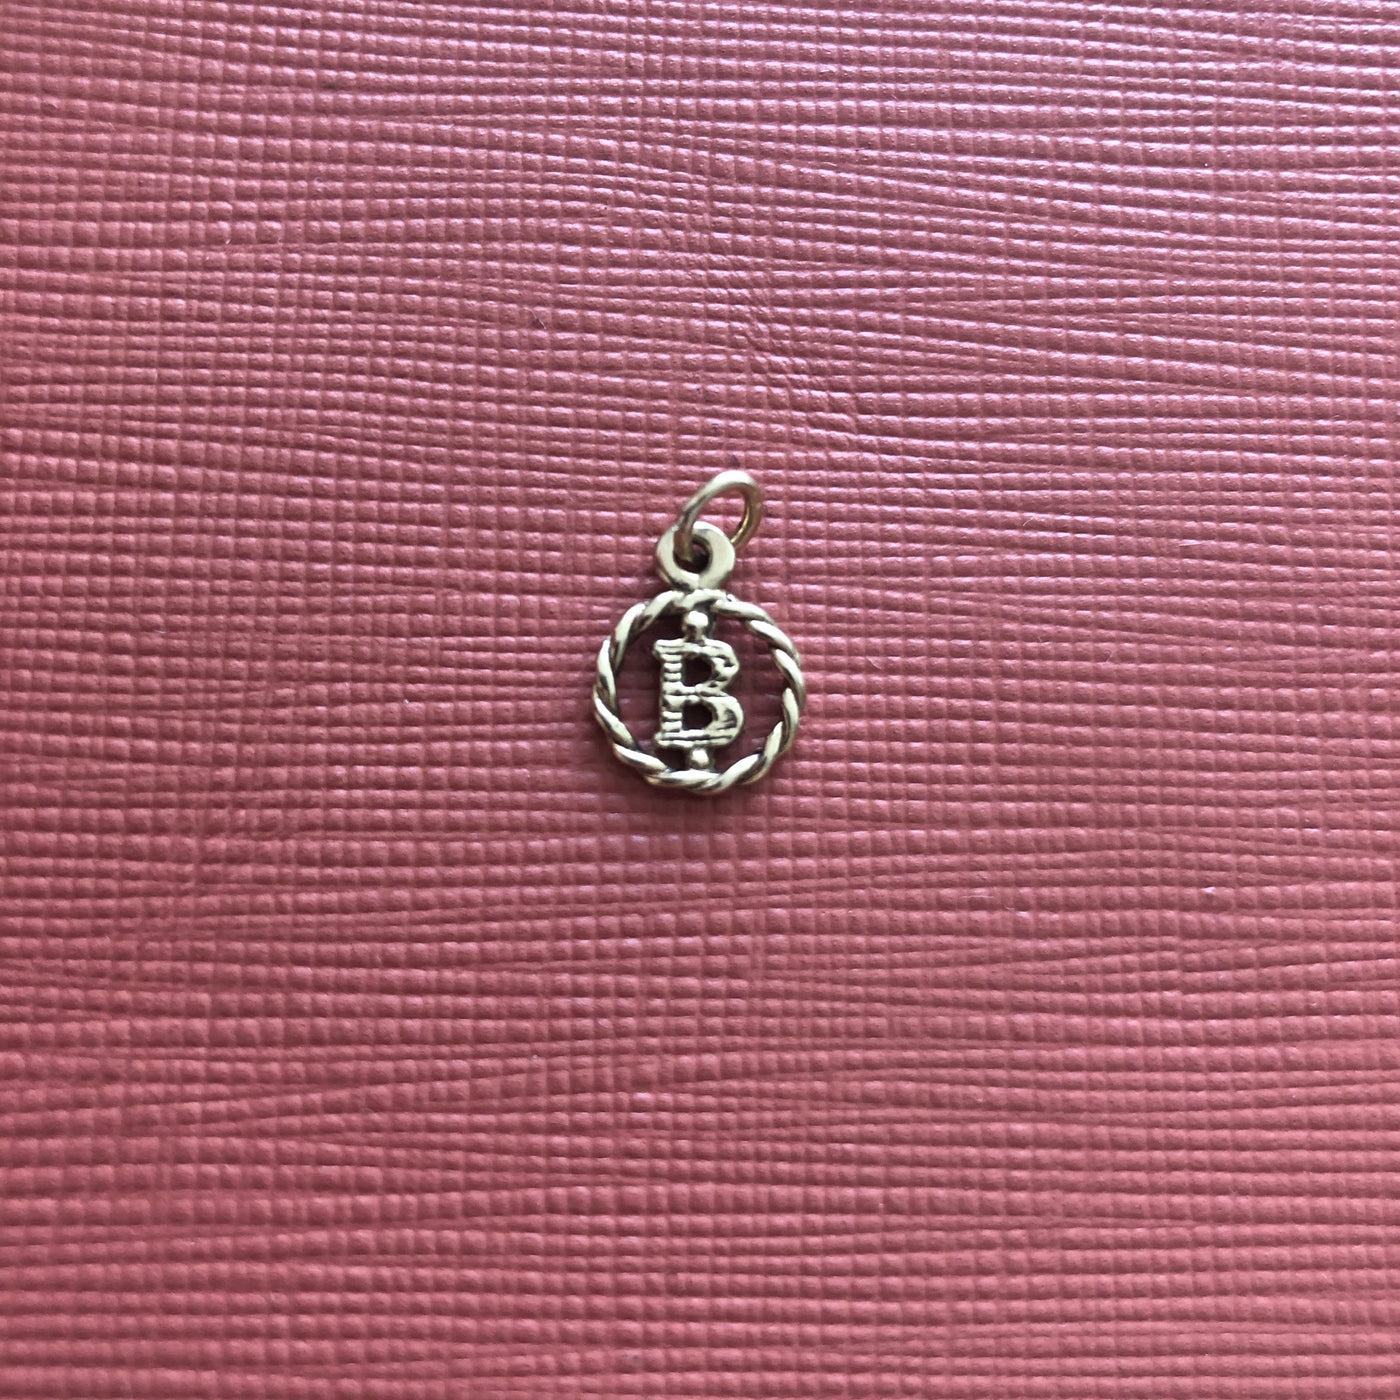 'Buckle' 9ct Vintage Gold B Charm